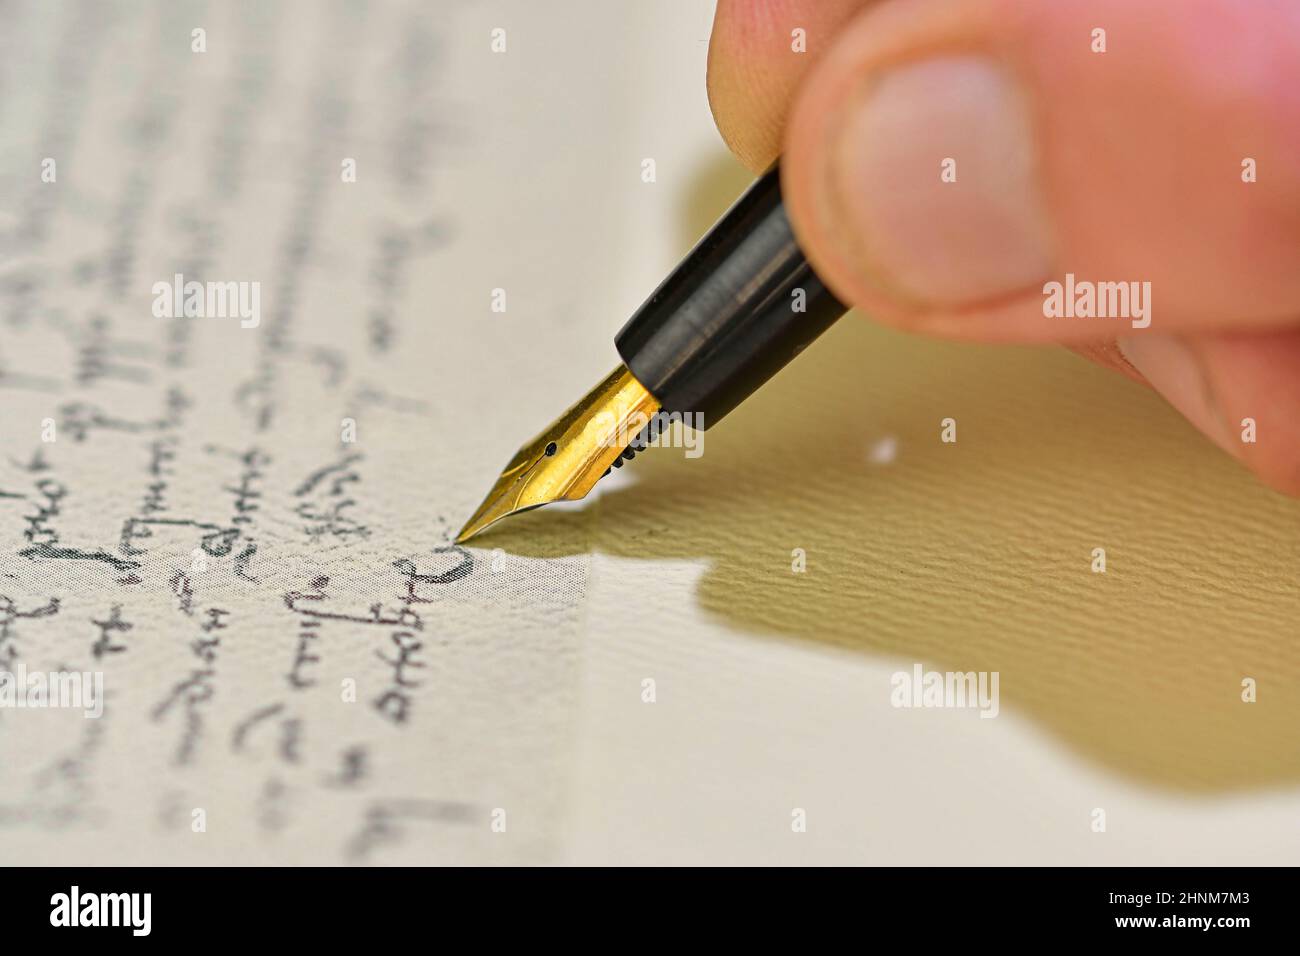 Antique style. Hand writing letter with fountain pen. Close-up of a male hand ready to write with an elegant fountain pen Stock Photo